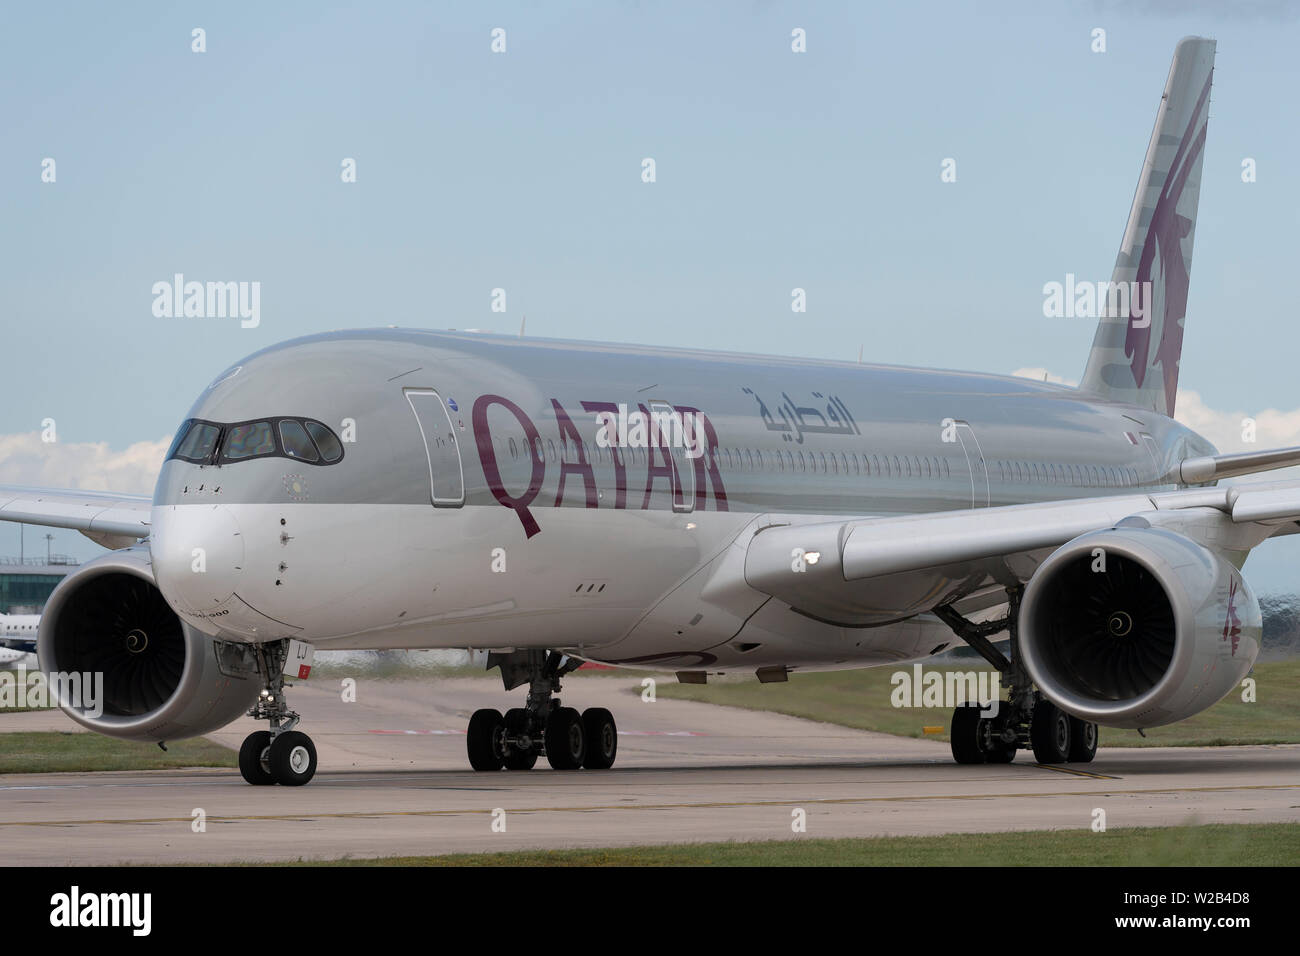 A Qatar Airways Airbus A350 taxis on the runway at Manchester Airport, UK. Stock Photo